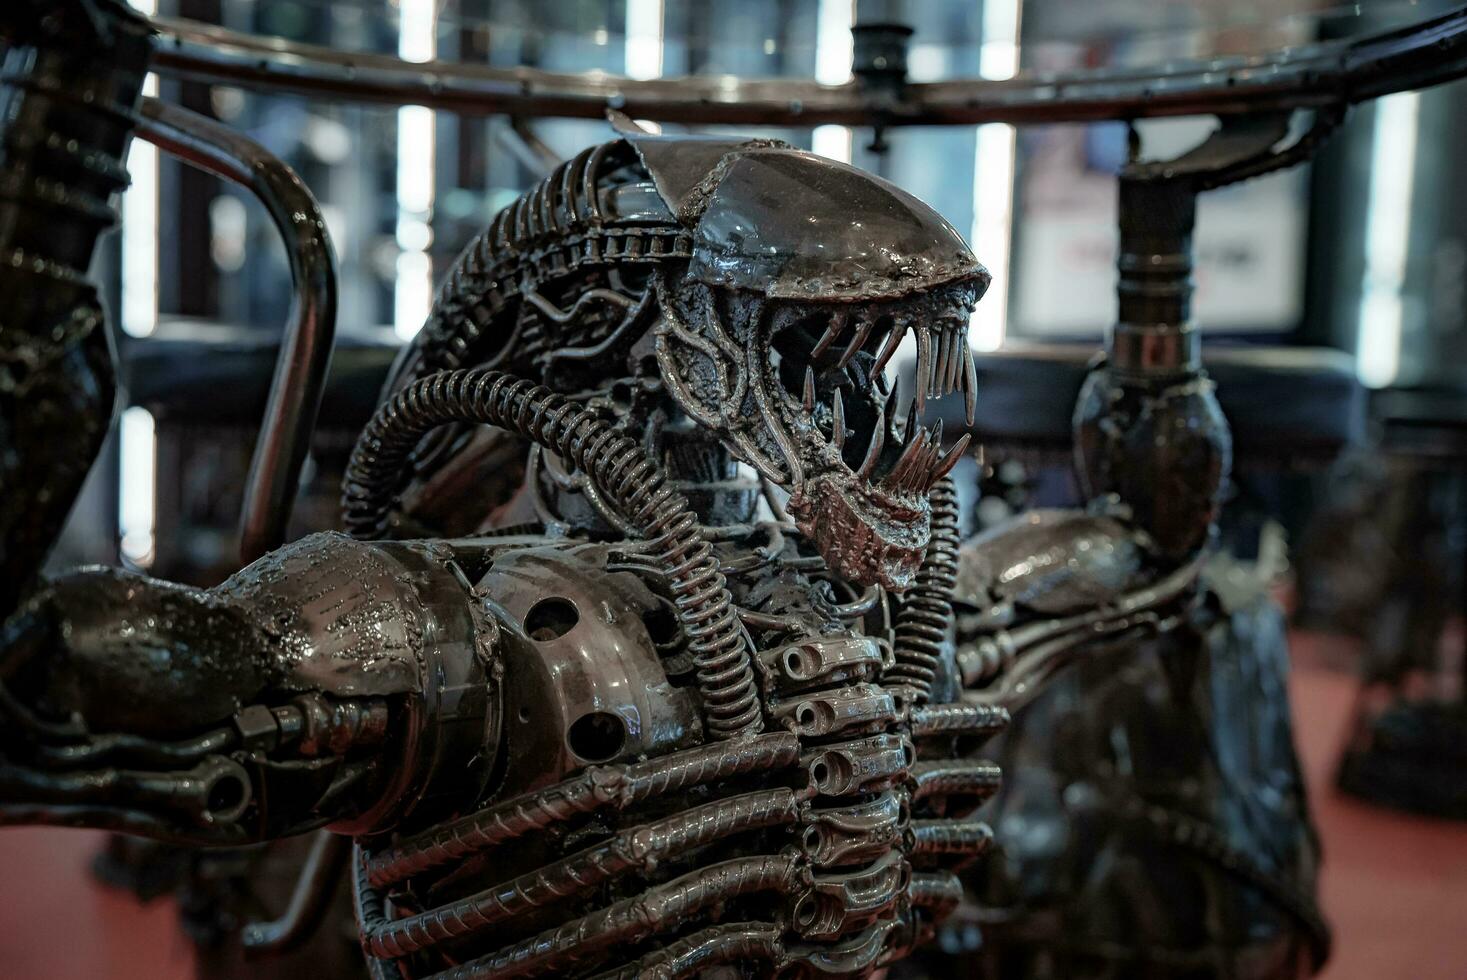 Slightly dusty xenomorph Alien statue by Eaglemoss collections photo